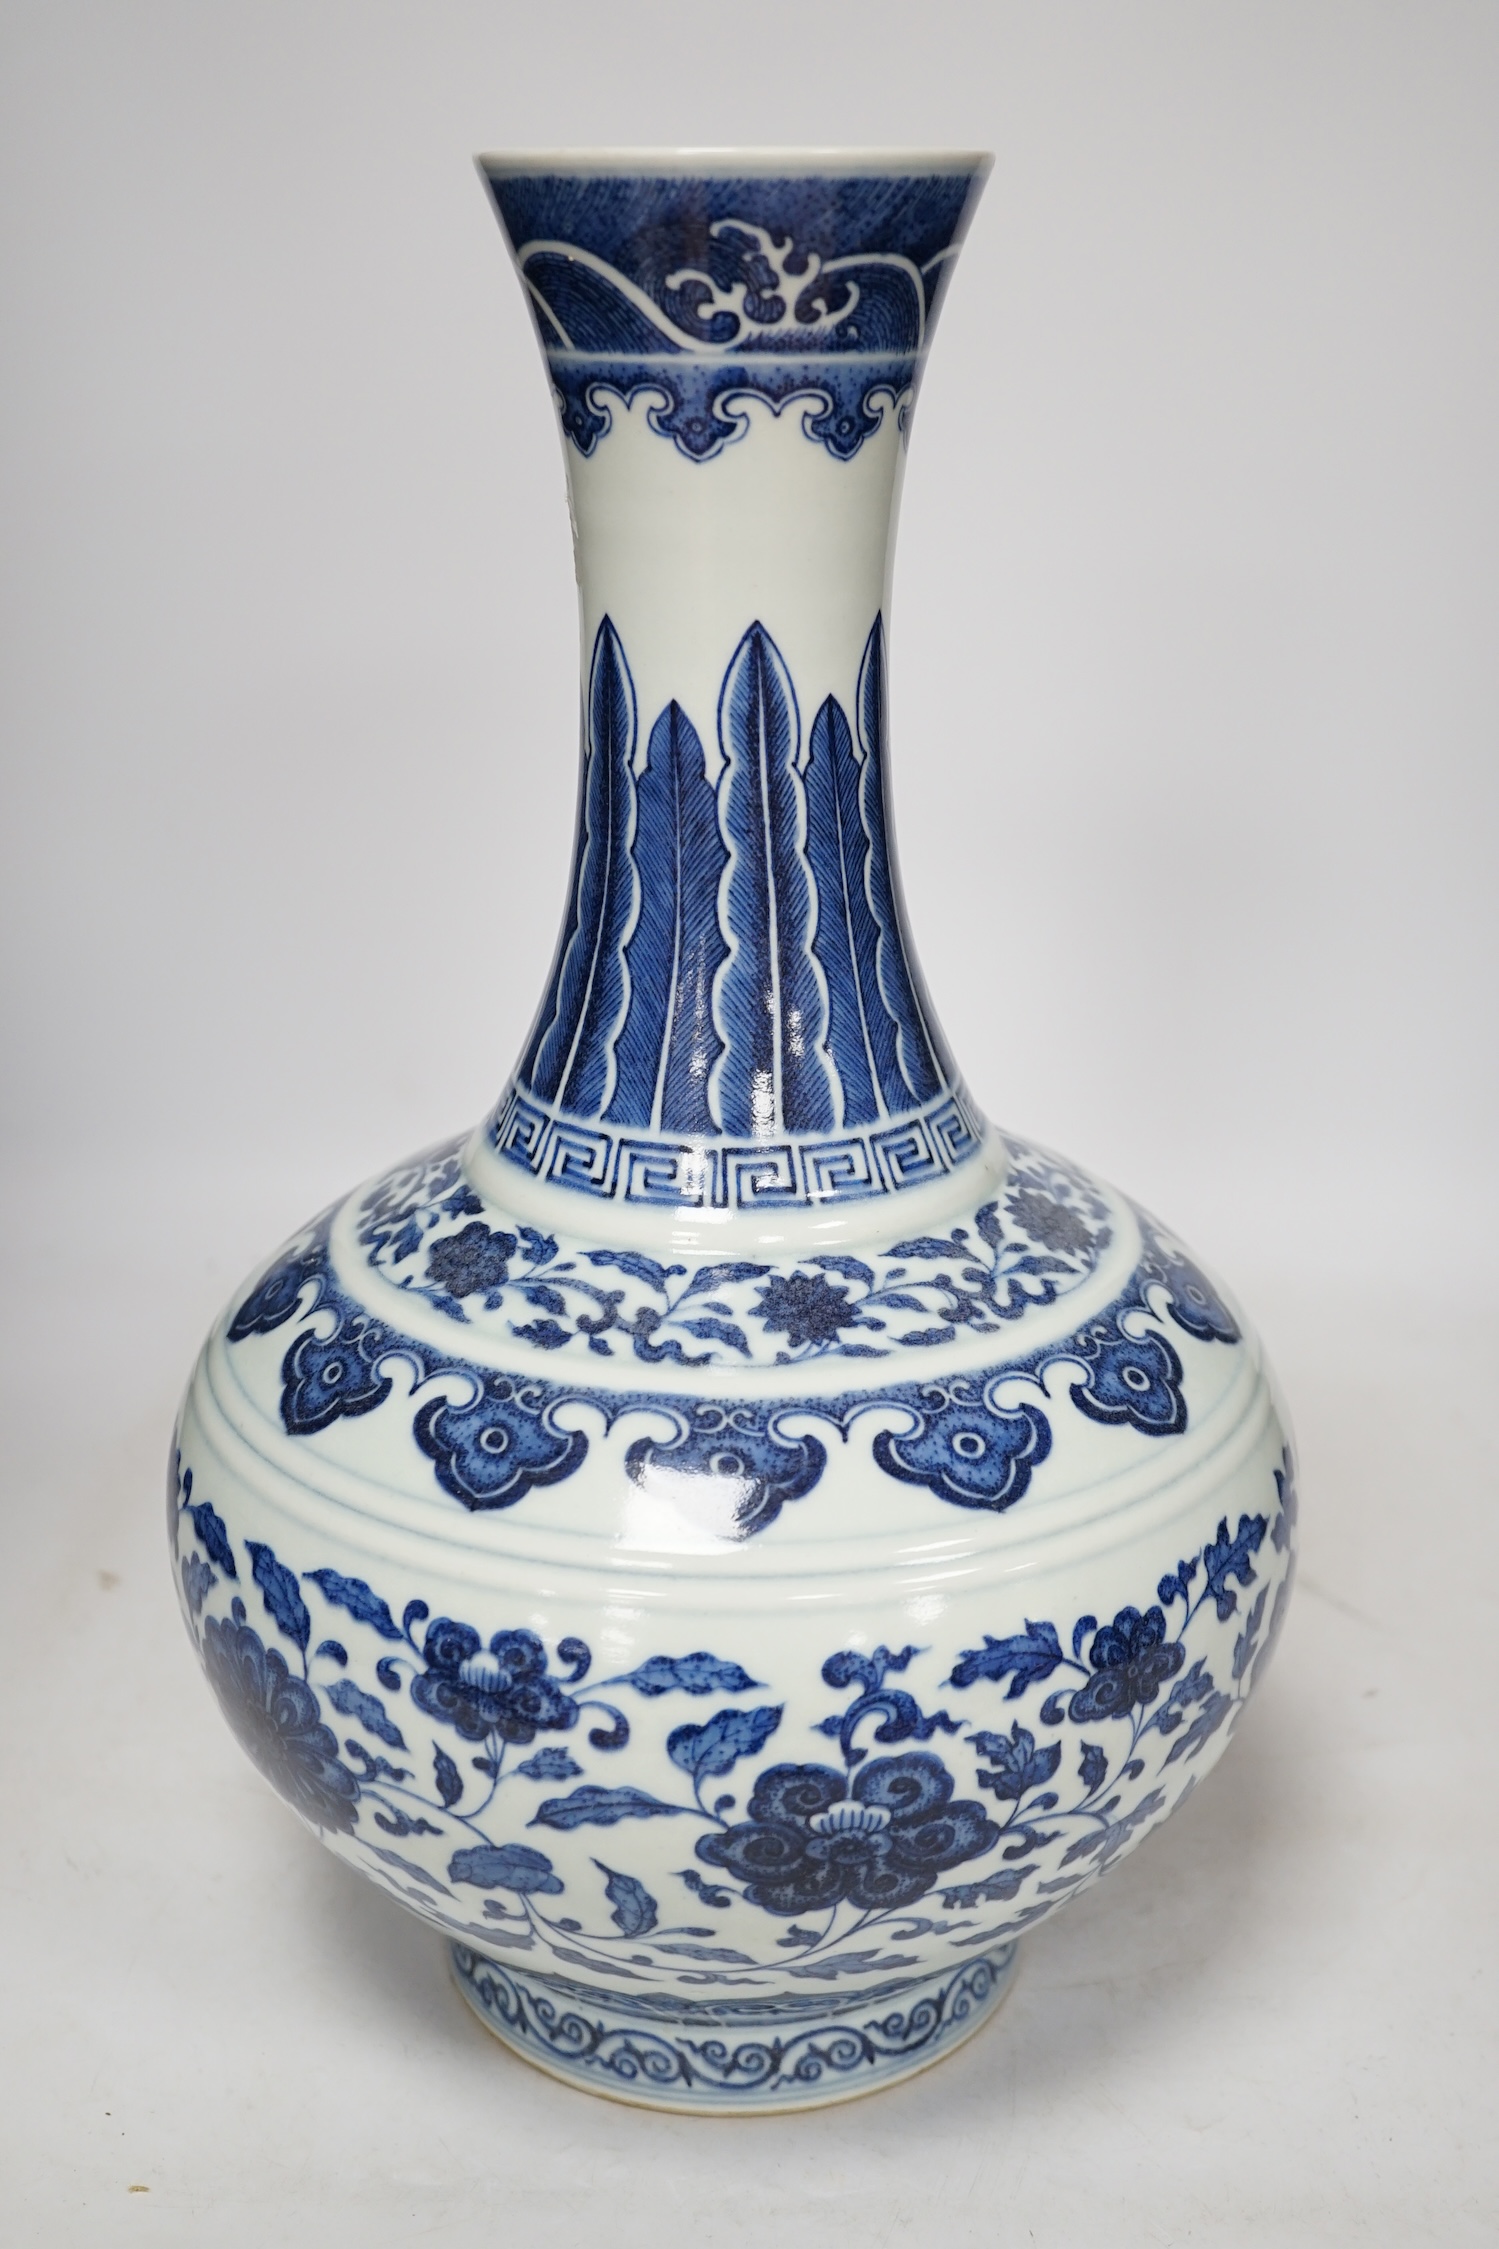 A Chinese blue and white porcelain vase, 38cm high. Condition - good